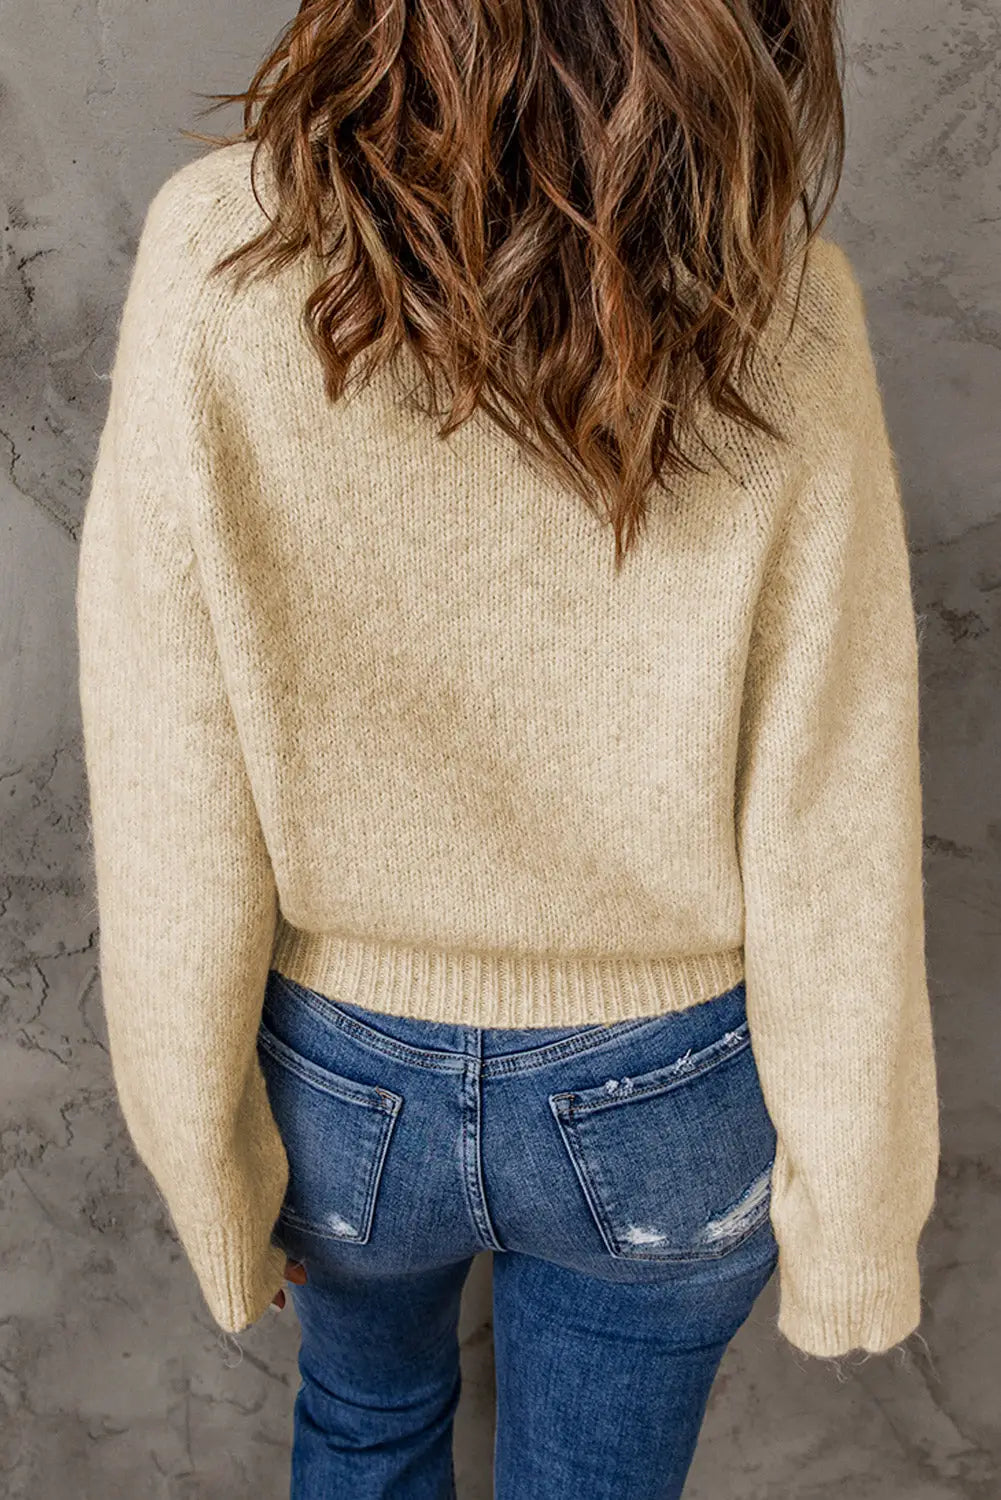 Apricot ribbed detail turtleneck sweater - tops